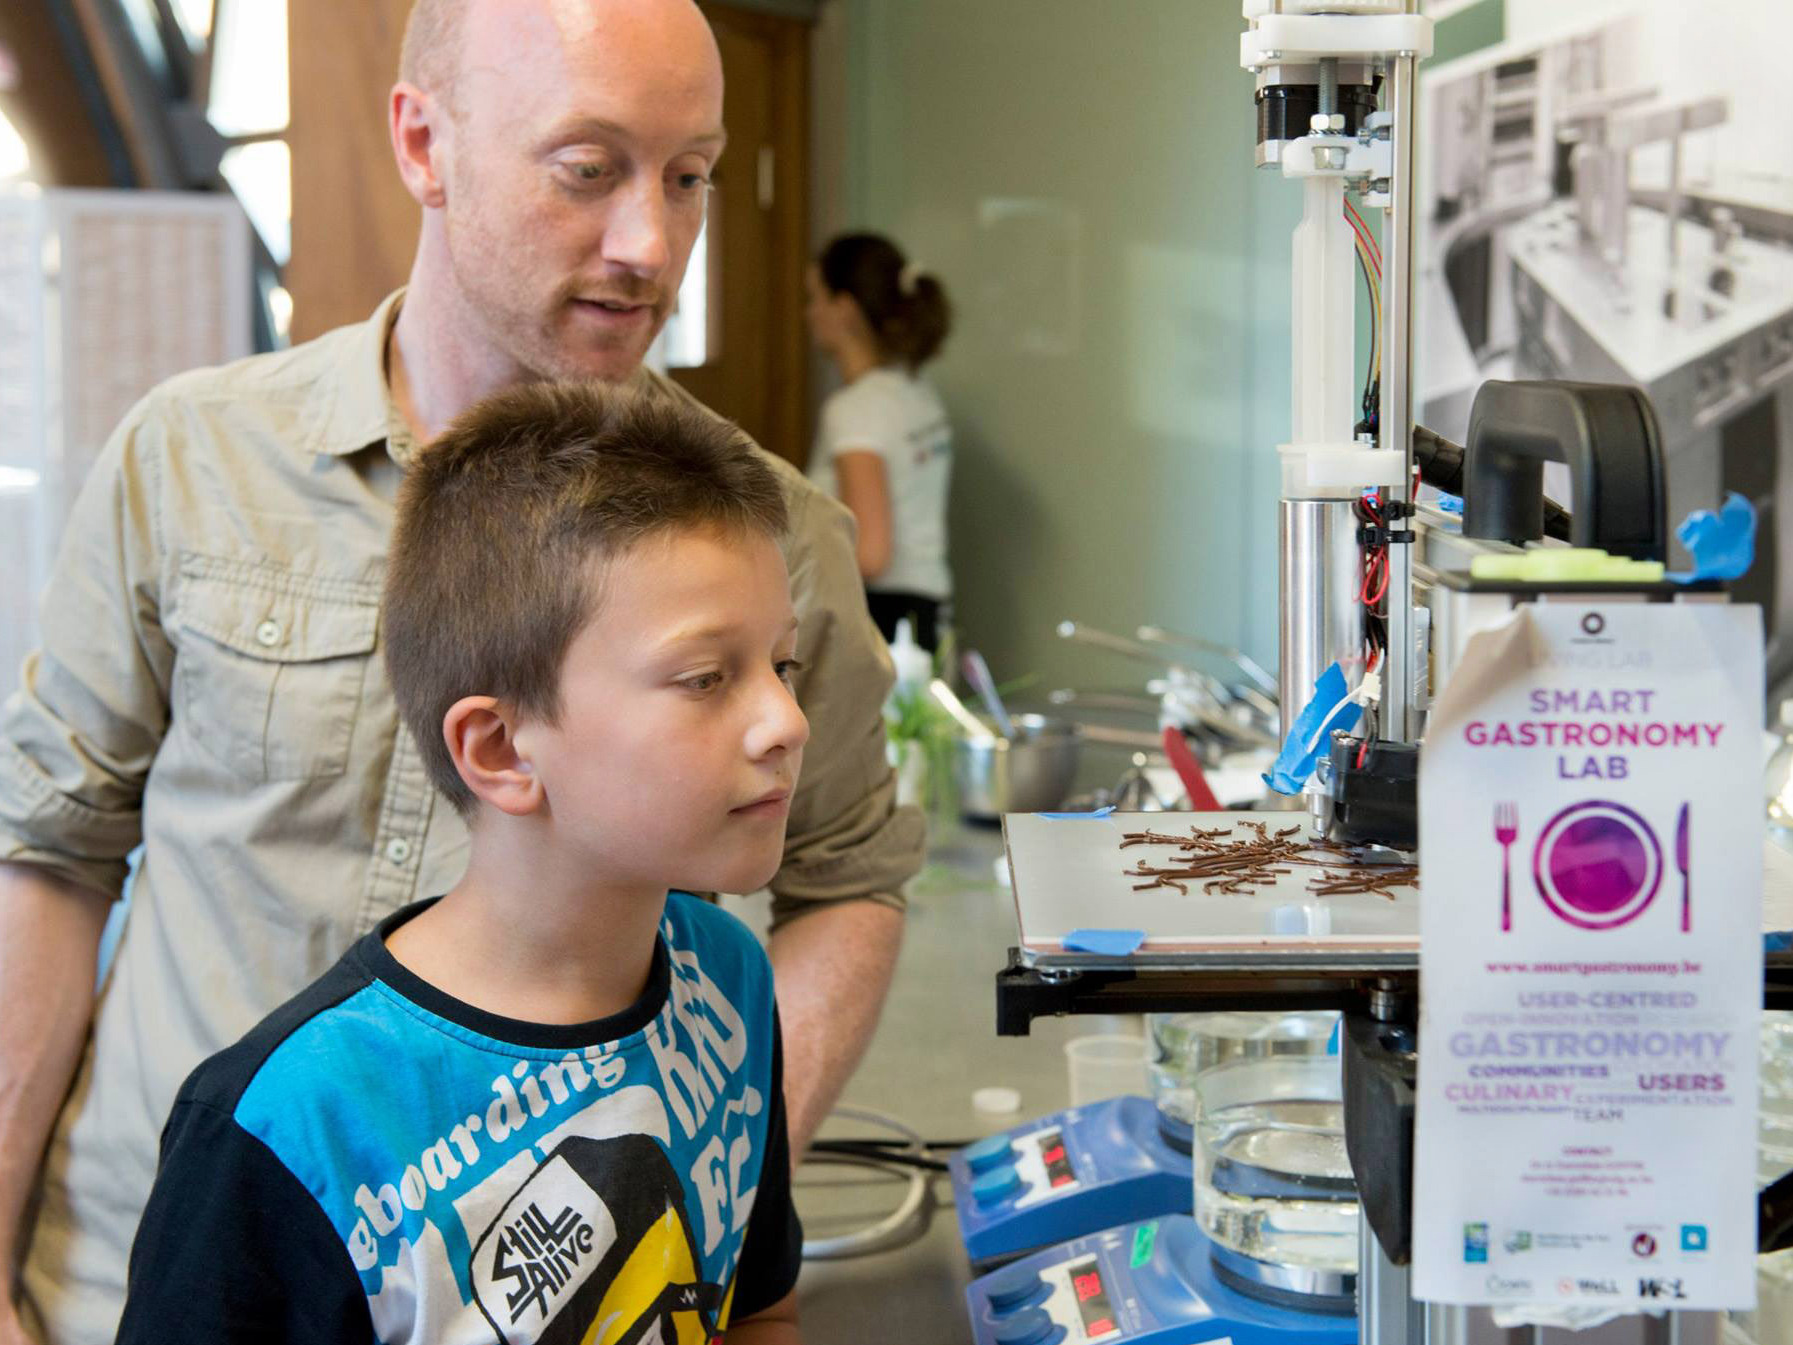 Lab visitors watch a 3-D printer squirt chocolate into an intricate shape designed by chef Arabelle Meirlaen.